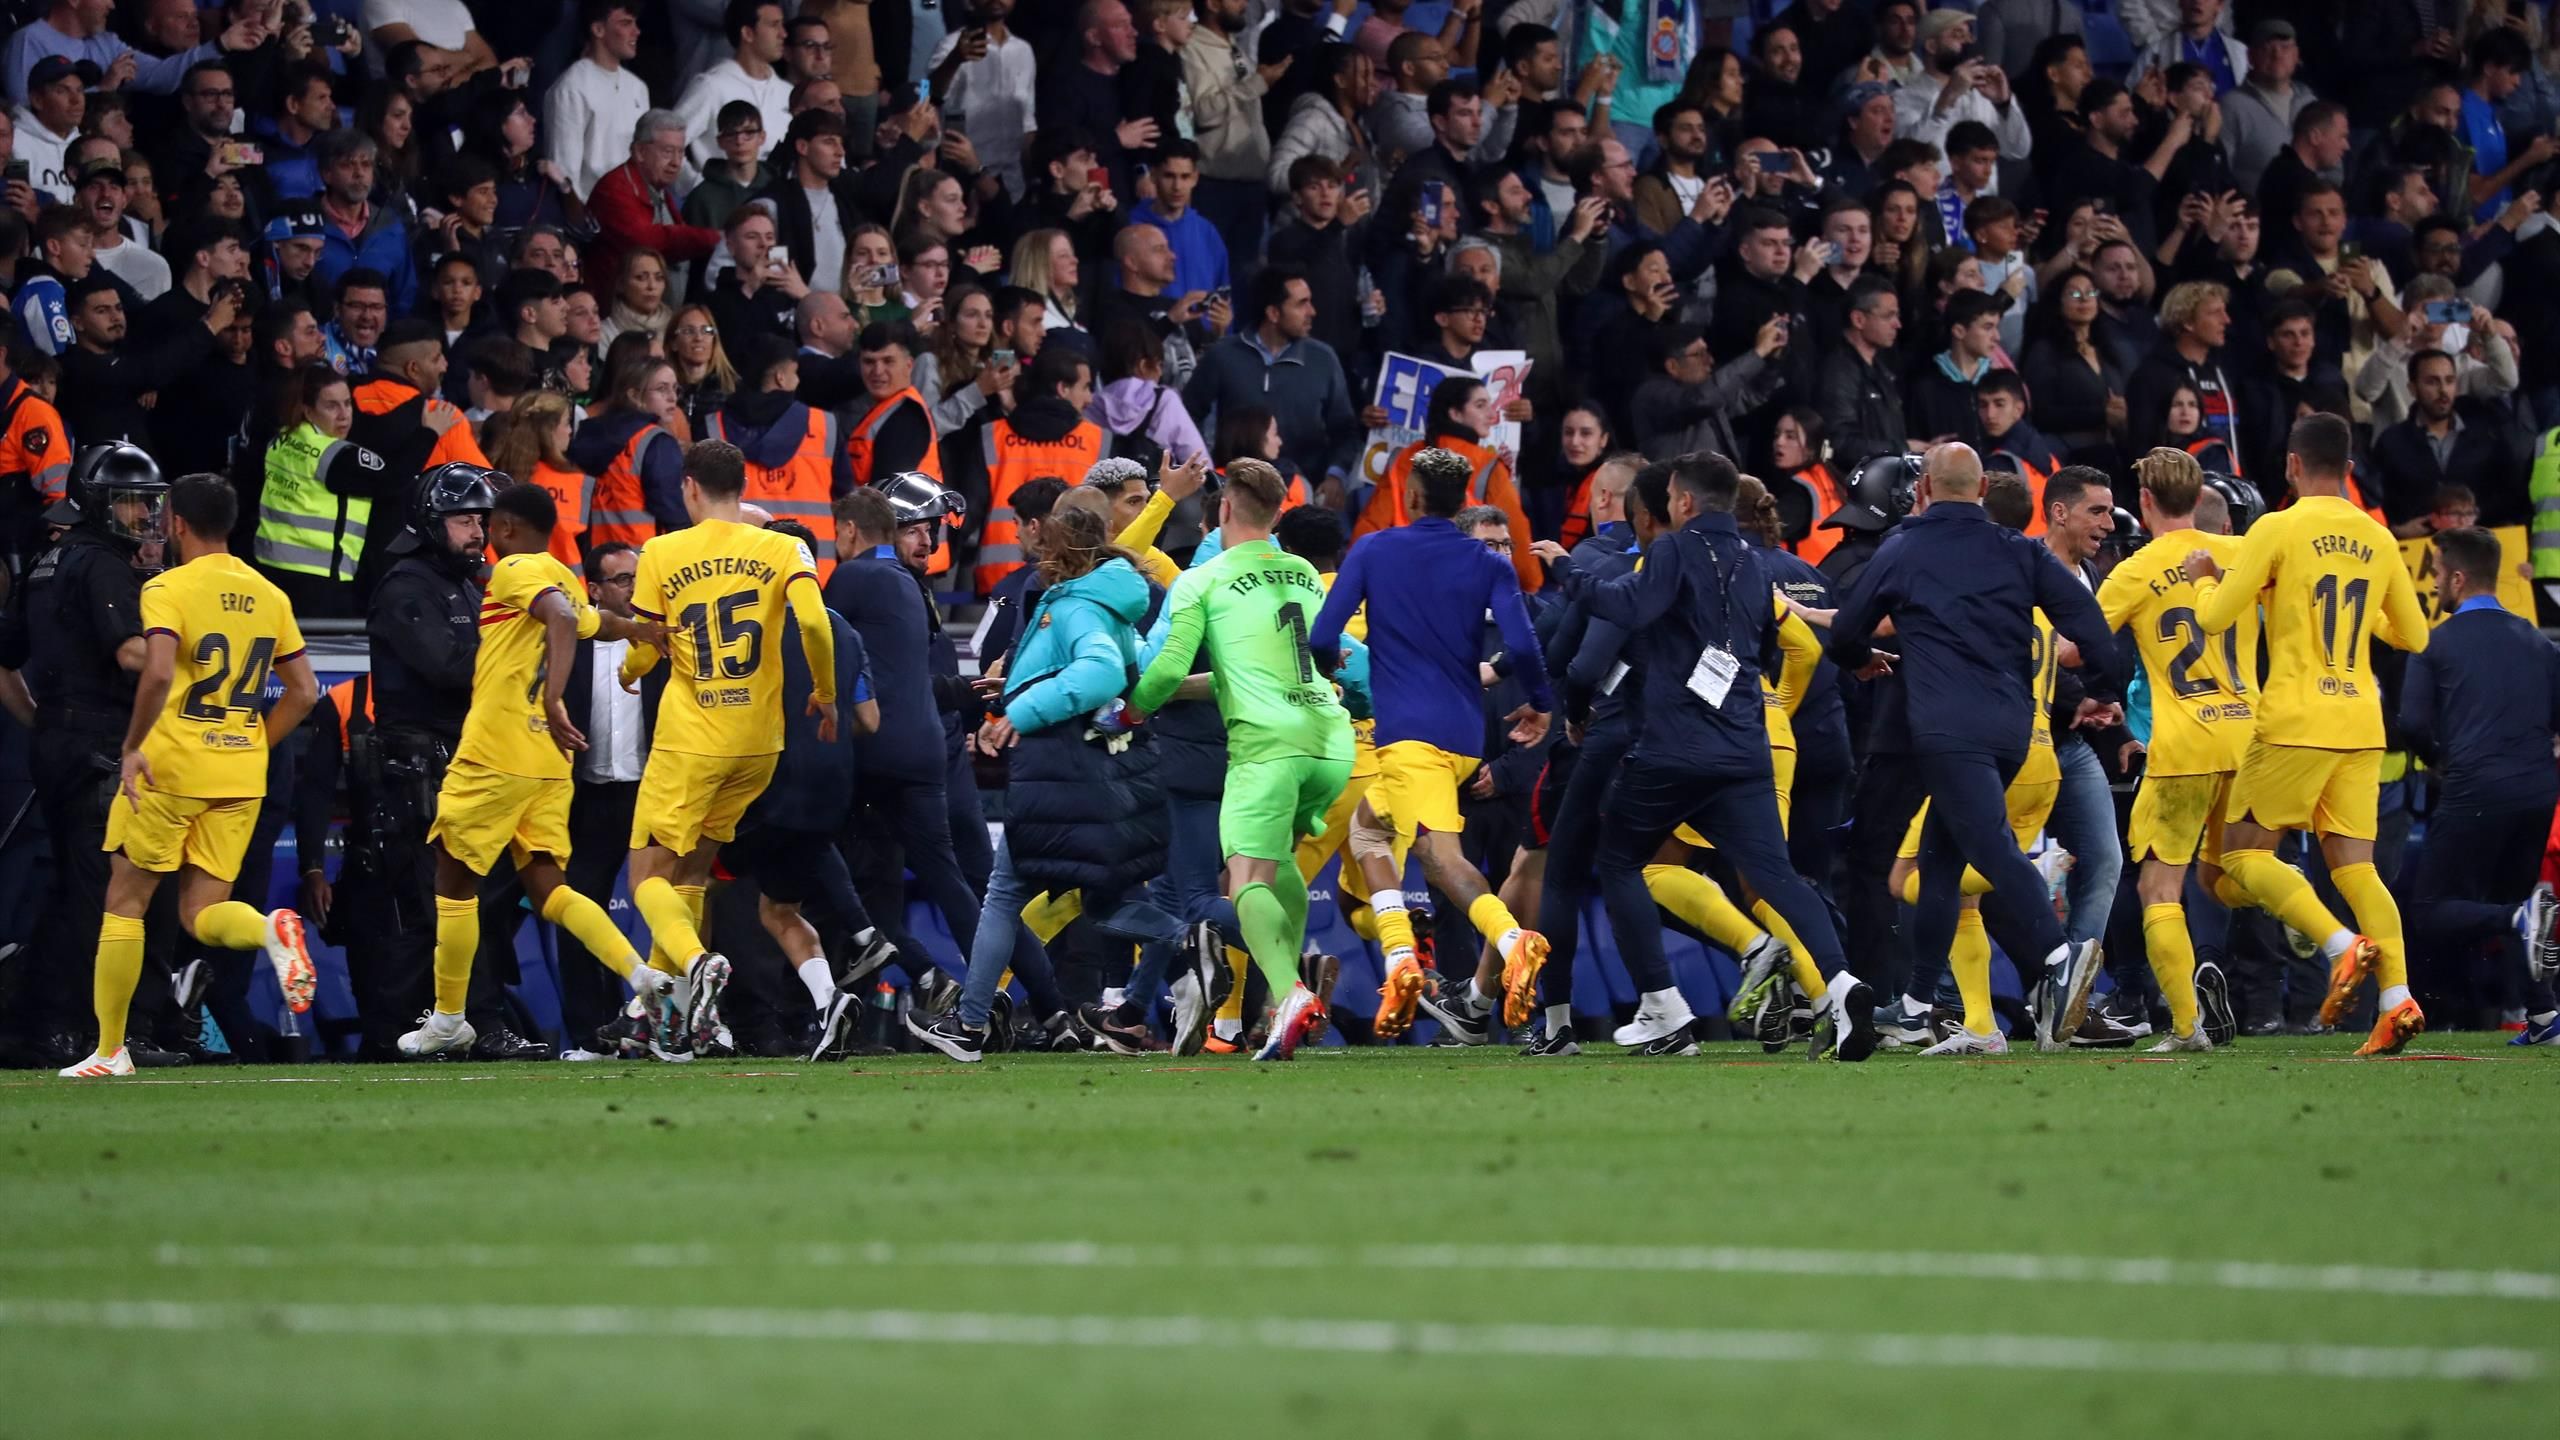 Spanish League |  Barcelona players had to flee from Espanyol fans after celebrating the national title